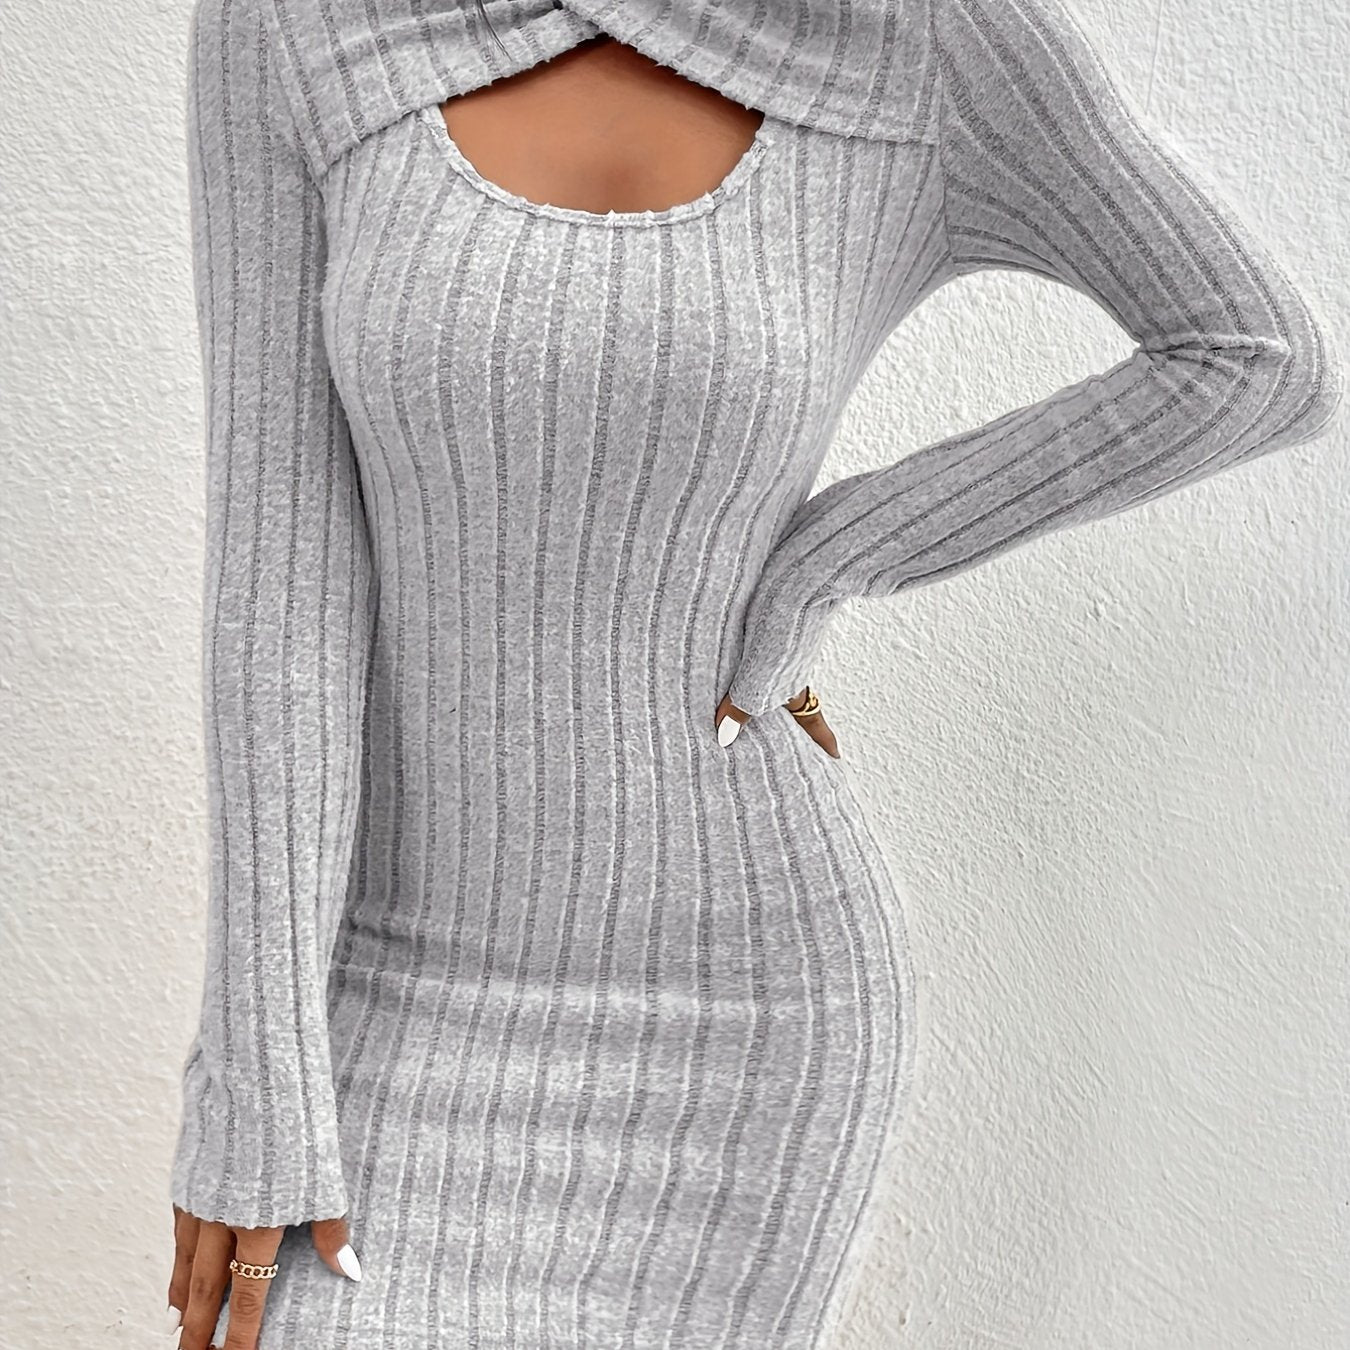 Antmvs Cut Out Ribbed Dress, Casual Long Sleeve Solid Bodycon Dress, Women's Clothing